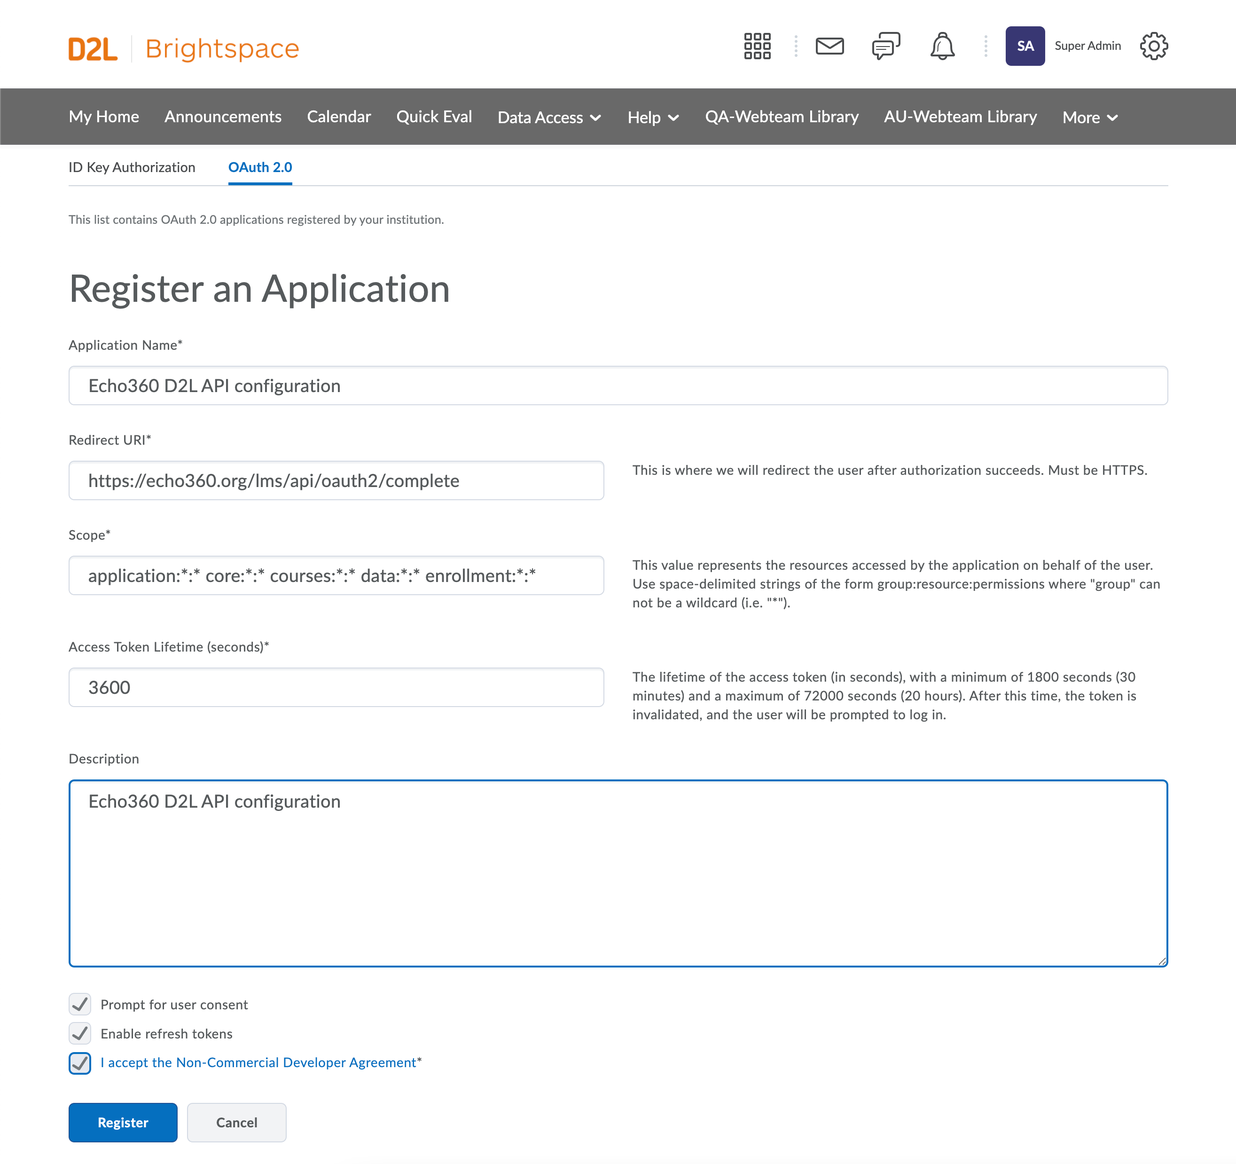 Completed Register an Application form in Brightspace with fields containing values provided in steps as described